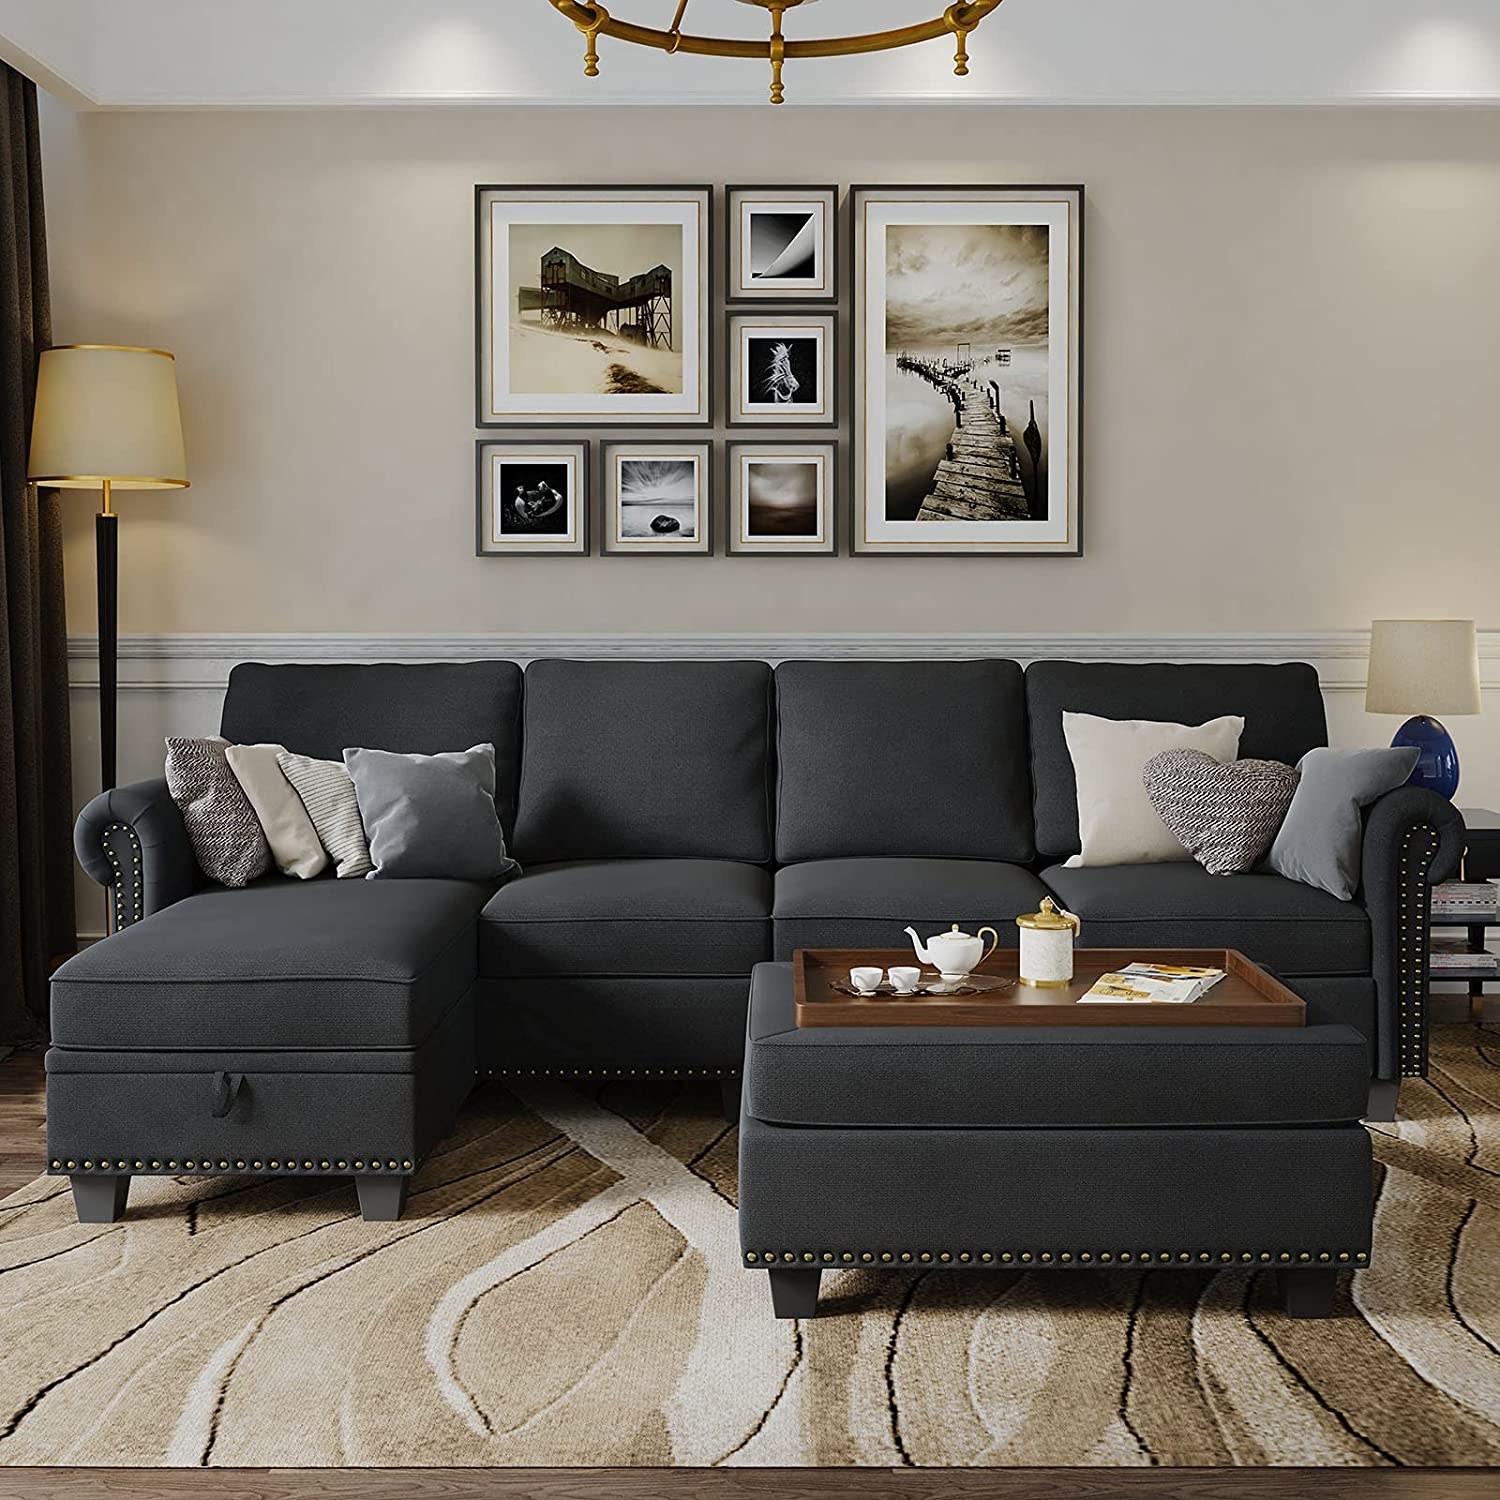 dark gray sectional sofa and ottoman with tray built in to the lid